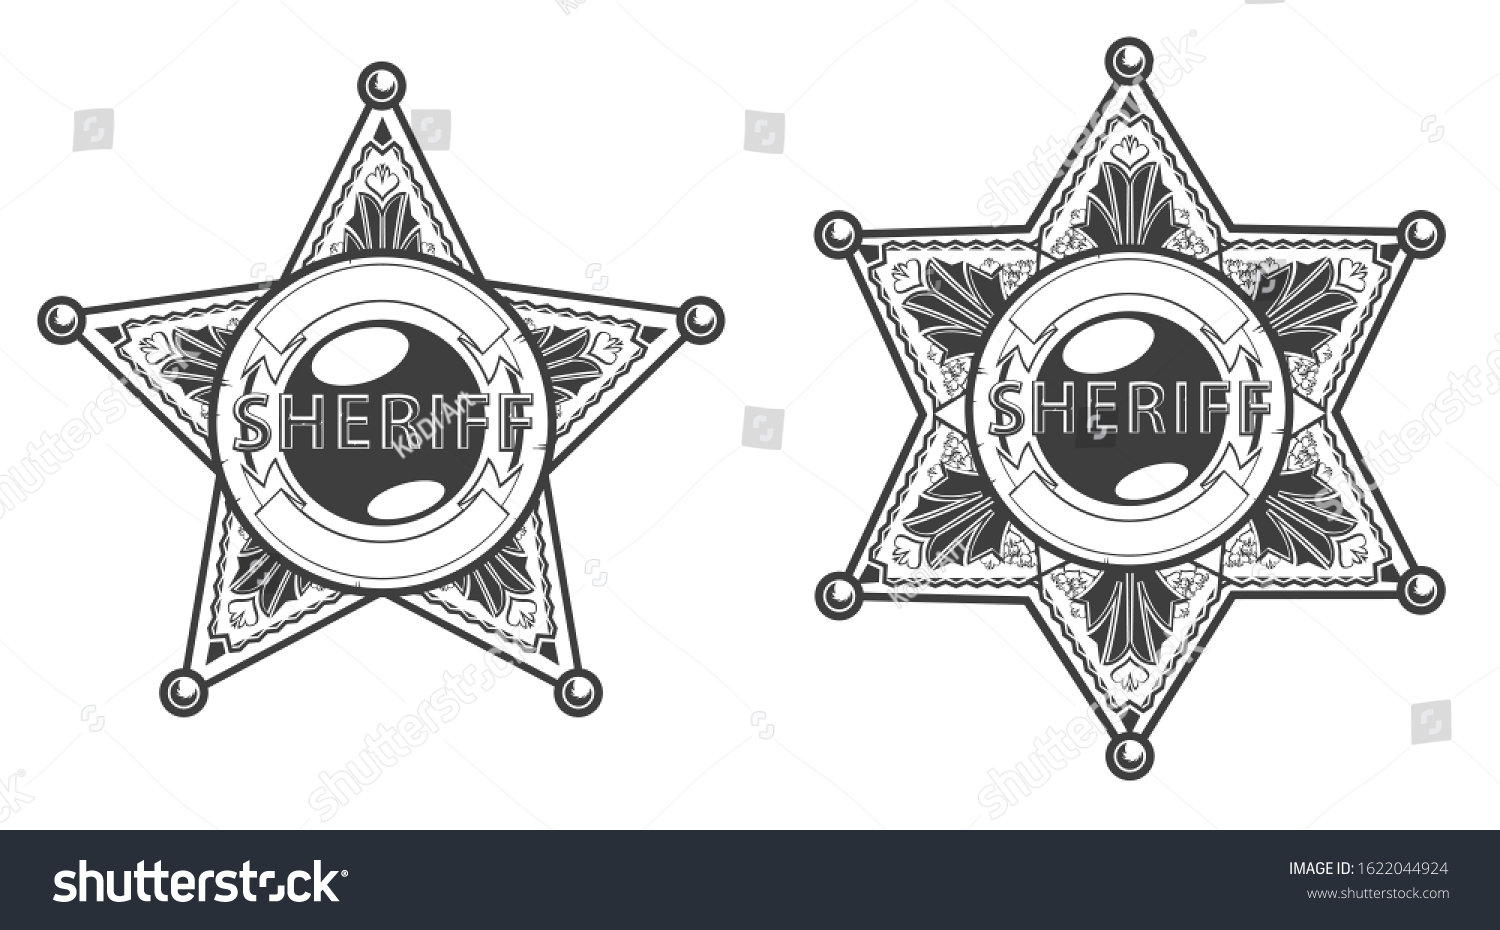 SVG of Vector cartoon sheriff star, vector illustration isolated on white background svg